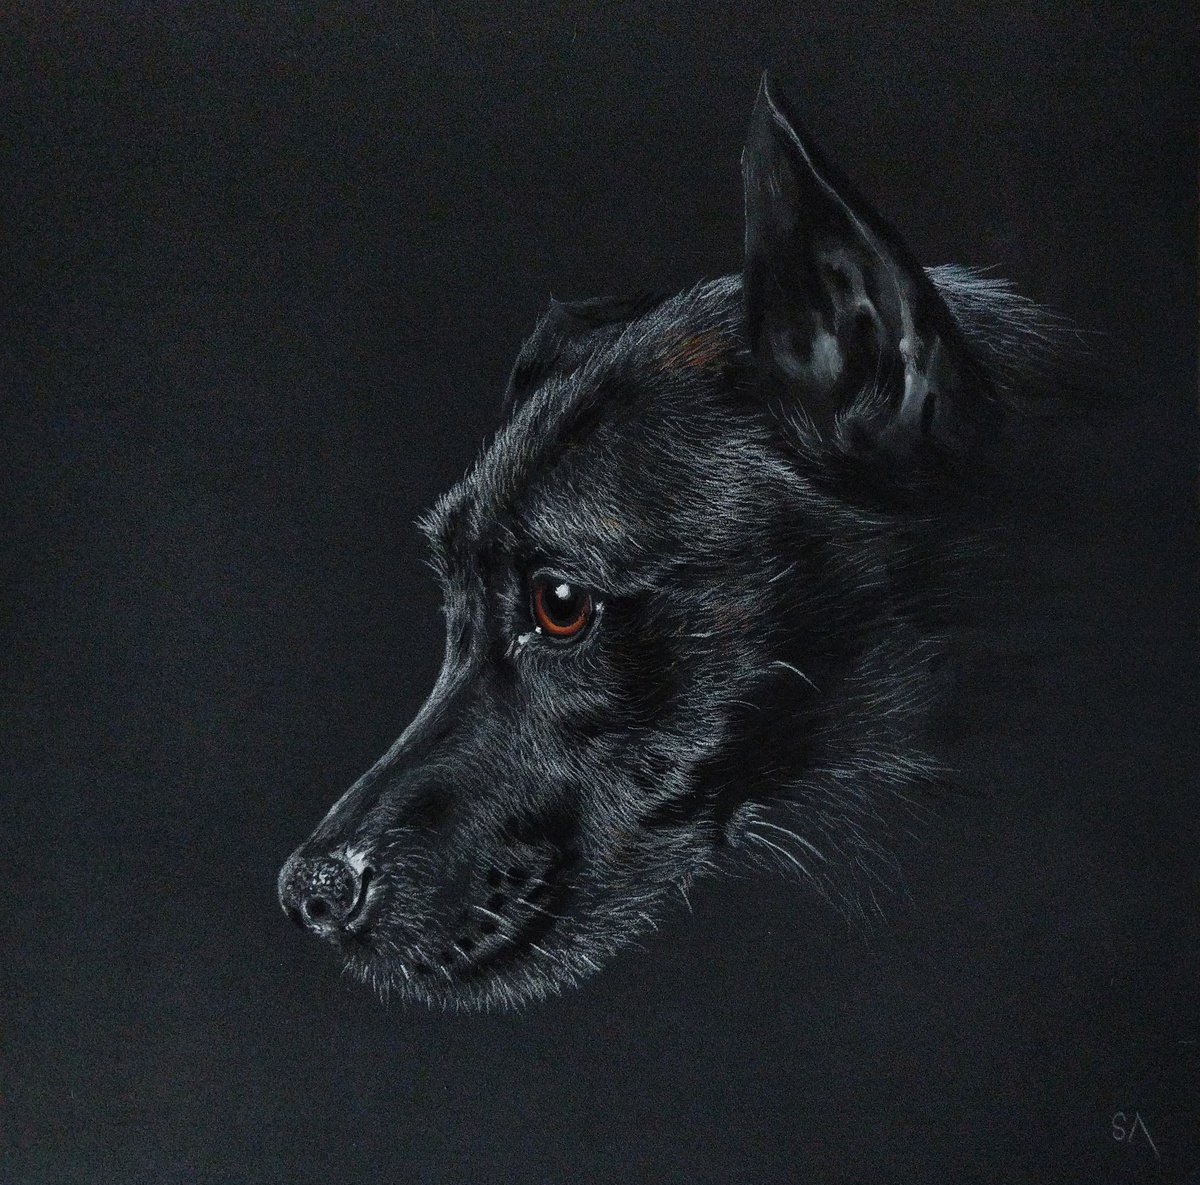 Patiently Waiting II Staffordshire Bull Terrier portrait (Original Painting) by Sean Afford